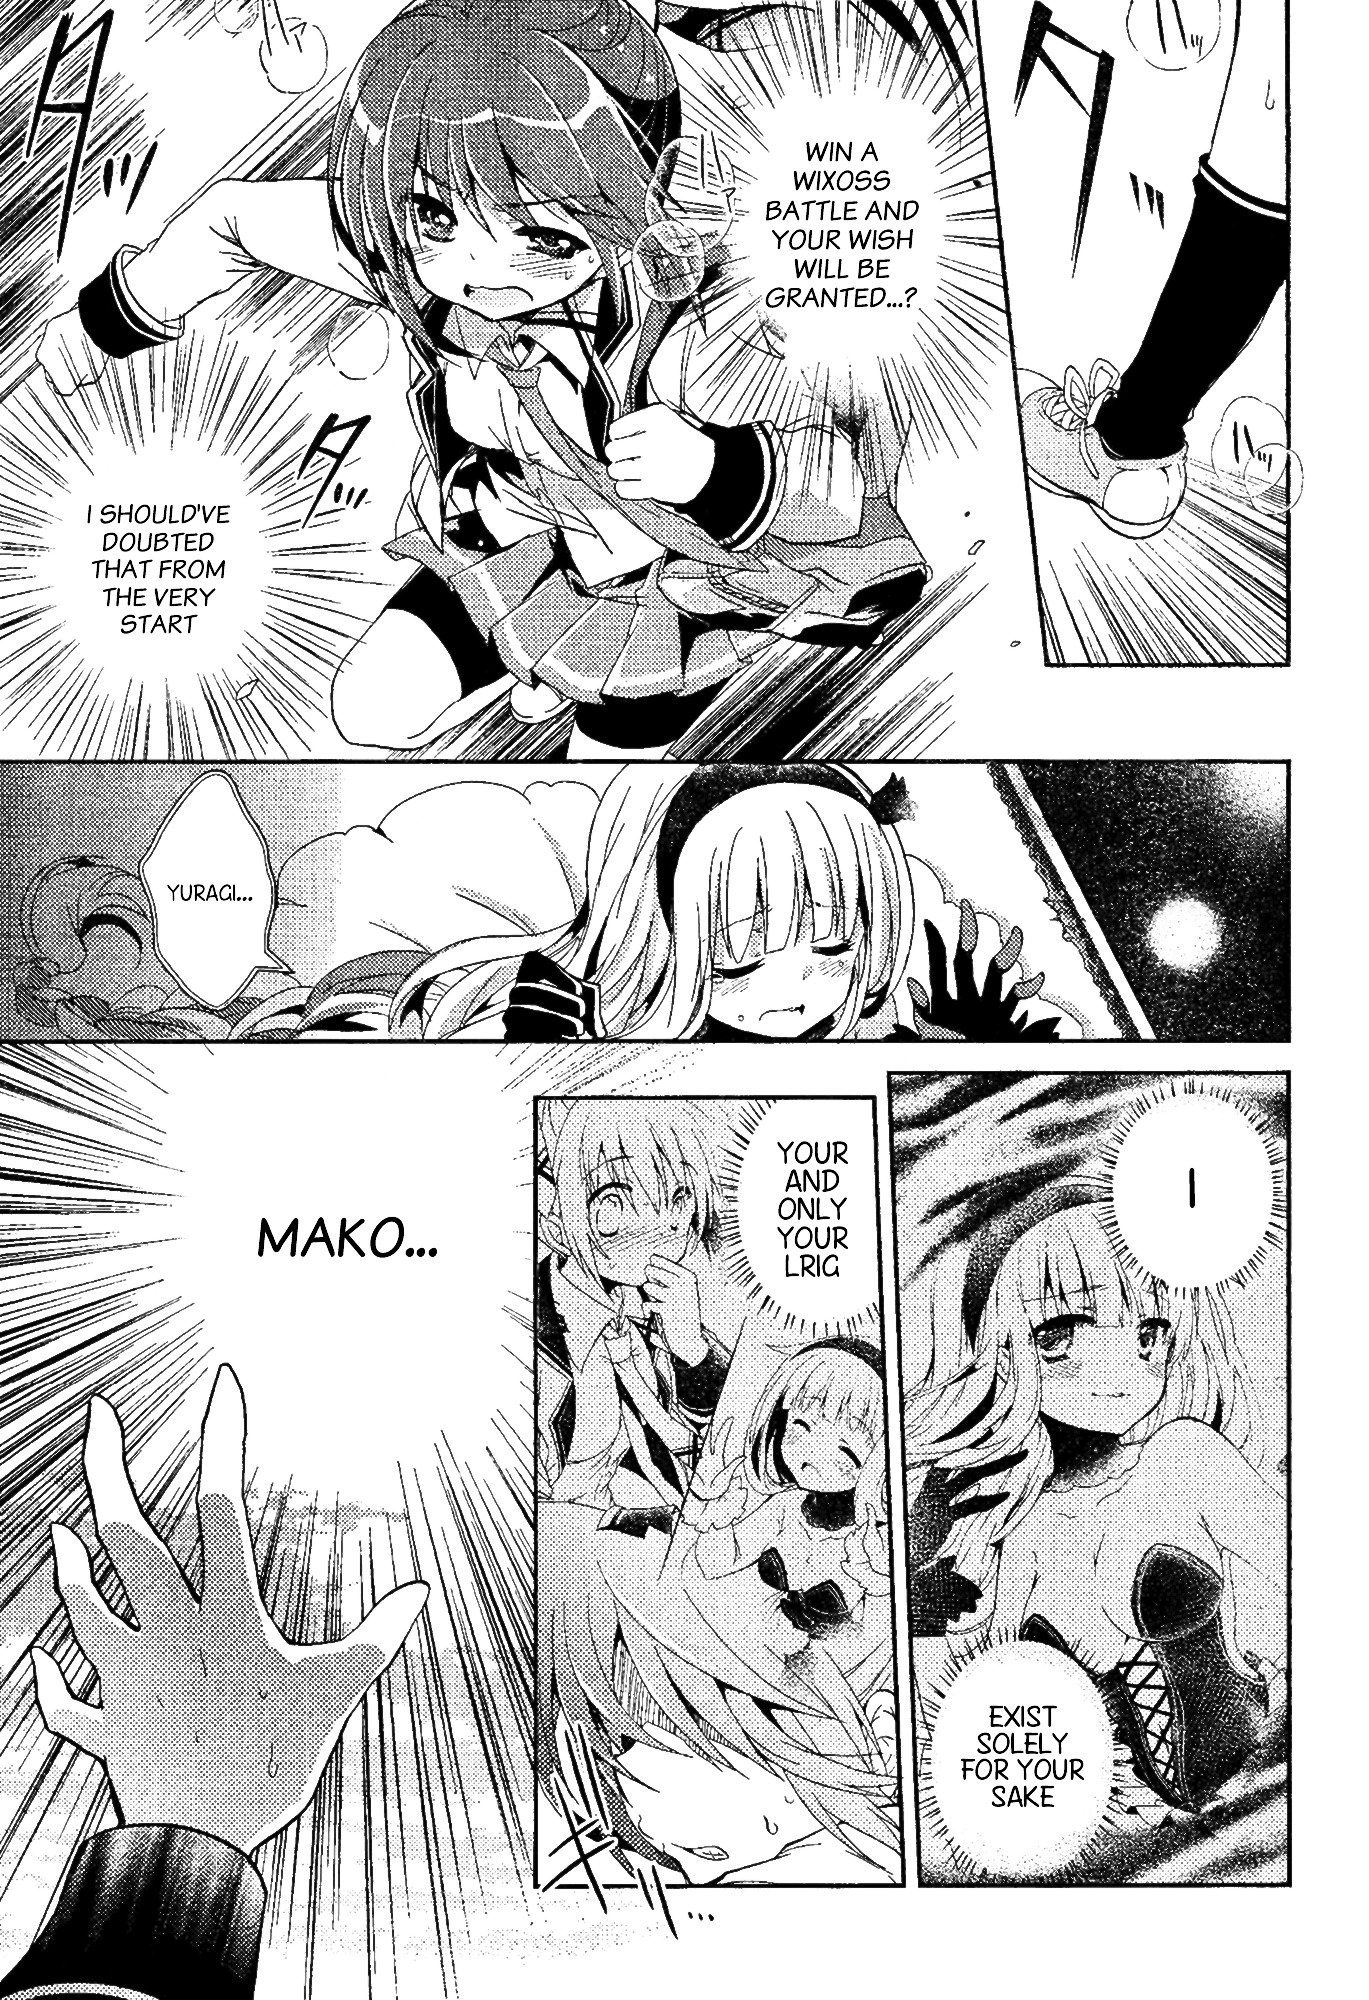 Selector Infected Wixoss - Re/verse - Chapter 3 #3